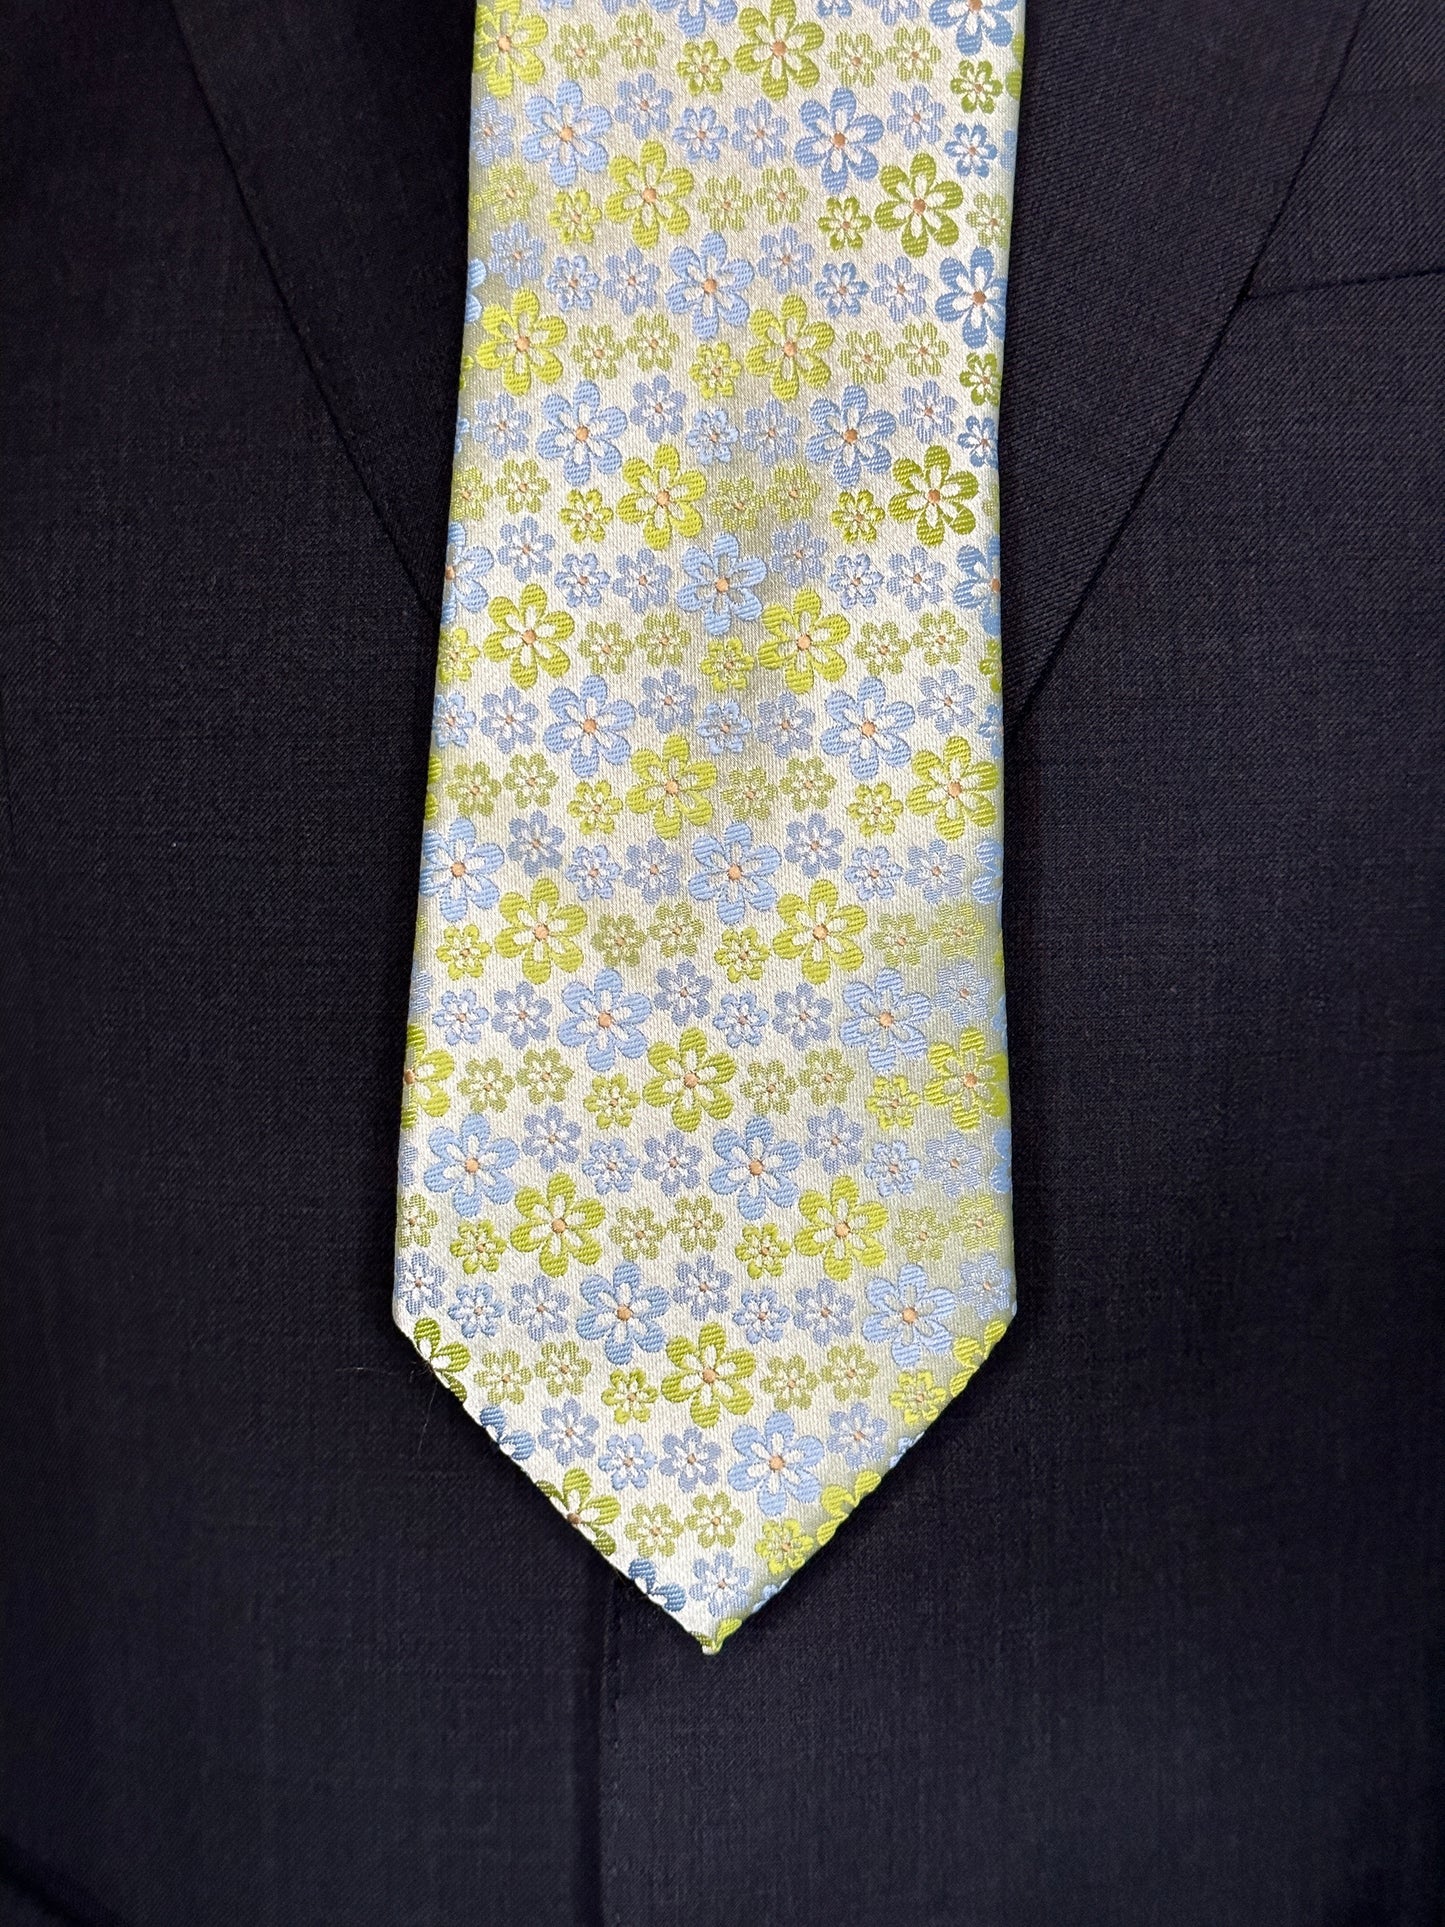 An amazing bright silk woven tie with summer mini florets. The characteristics of this tie coloration are very interesting in that it tends to take on the colors of what it is paired with. Take for instance the solid charcoal grey suit in the photos. This tie works very well with it. It would also go well with tan, black, navy, pinstripes, plaids and many others. There are always a few ties each season that tend to go with most colors and patterns and this is one of them.